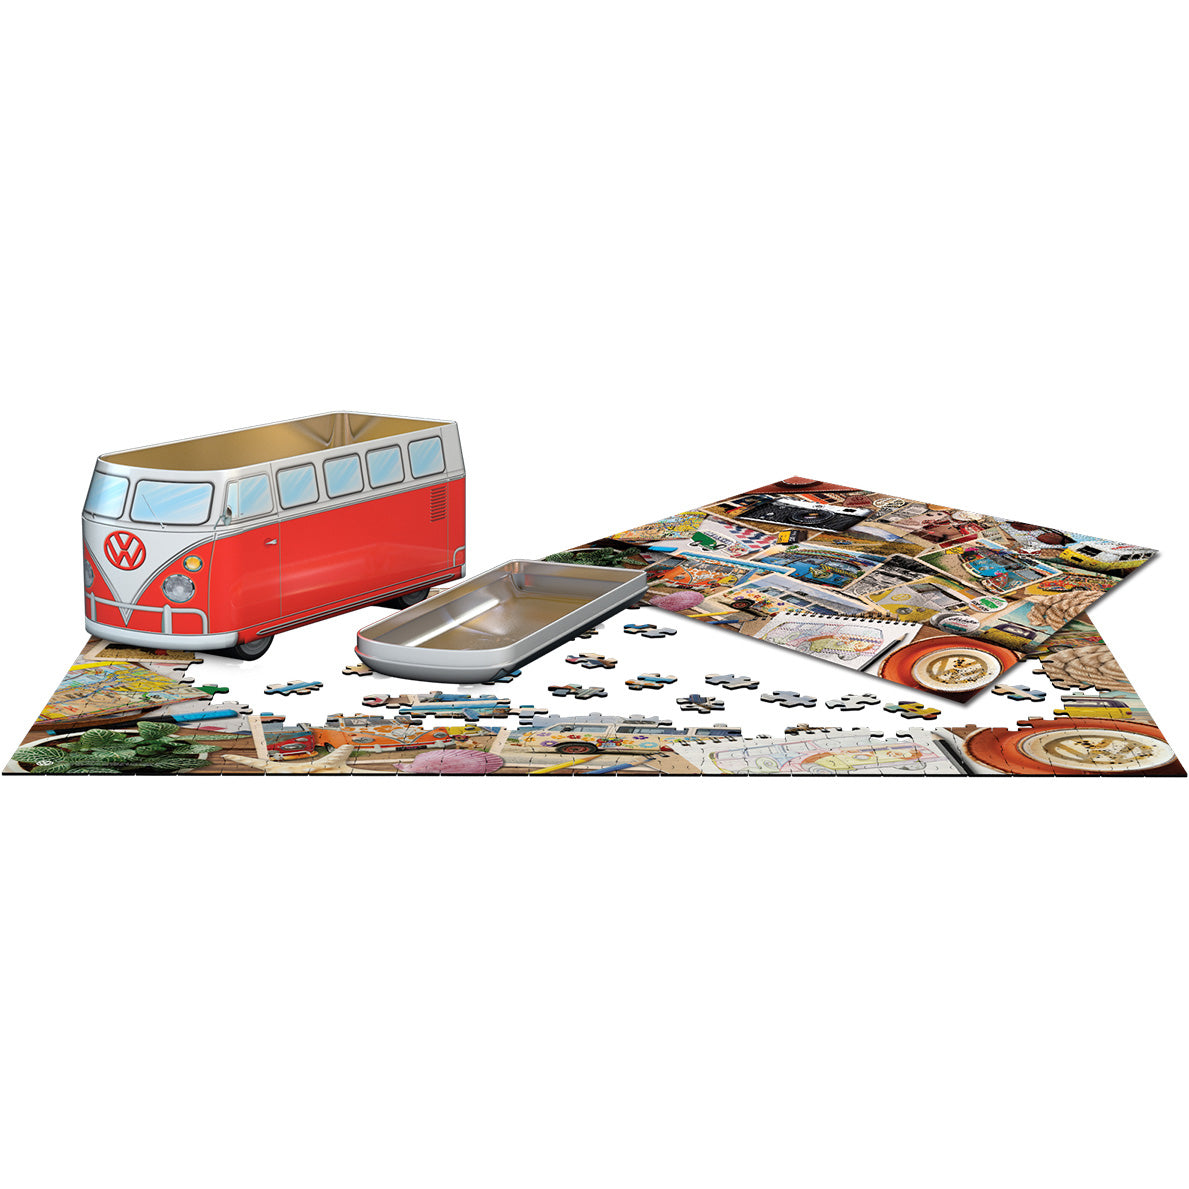 VW Road Trips 550-Piece Puzzle in Collectible Tin with Poster